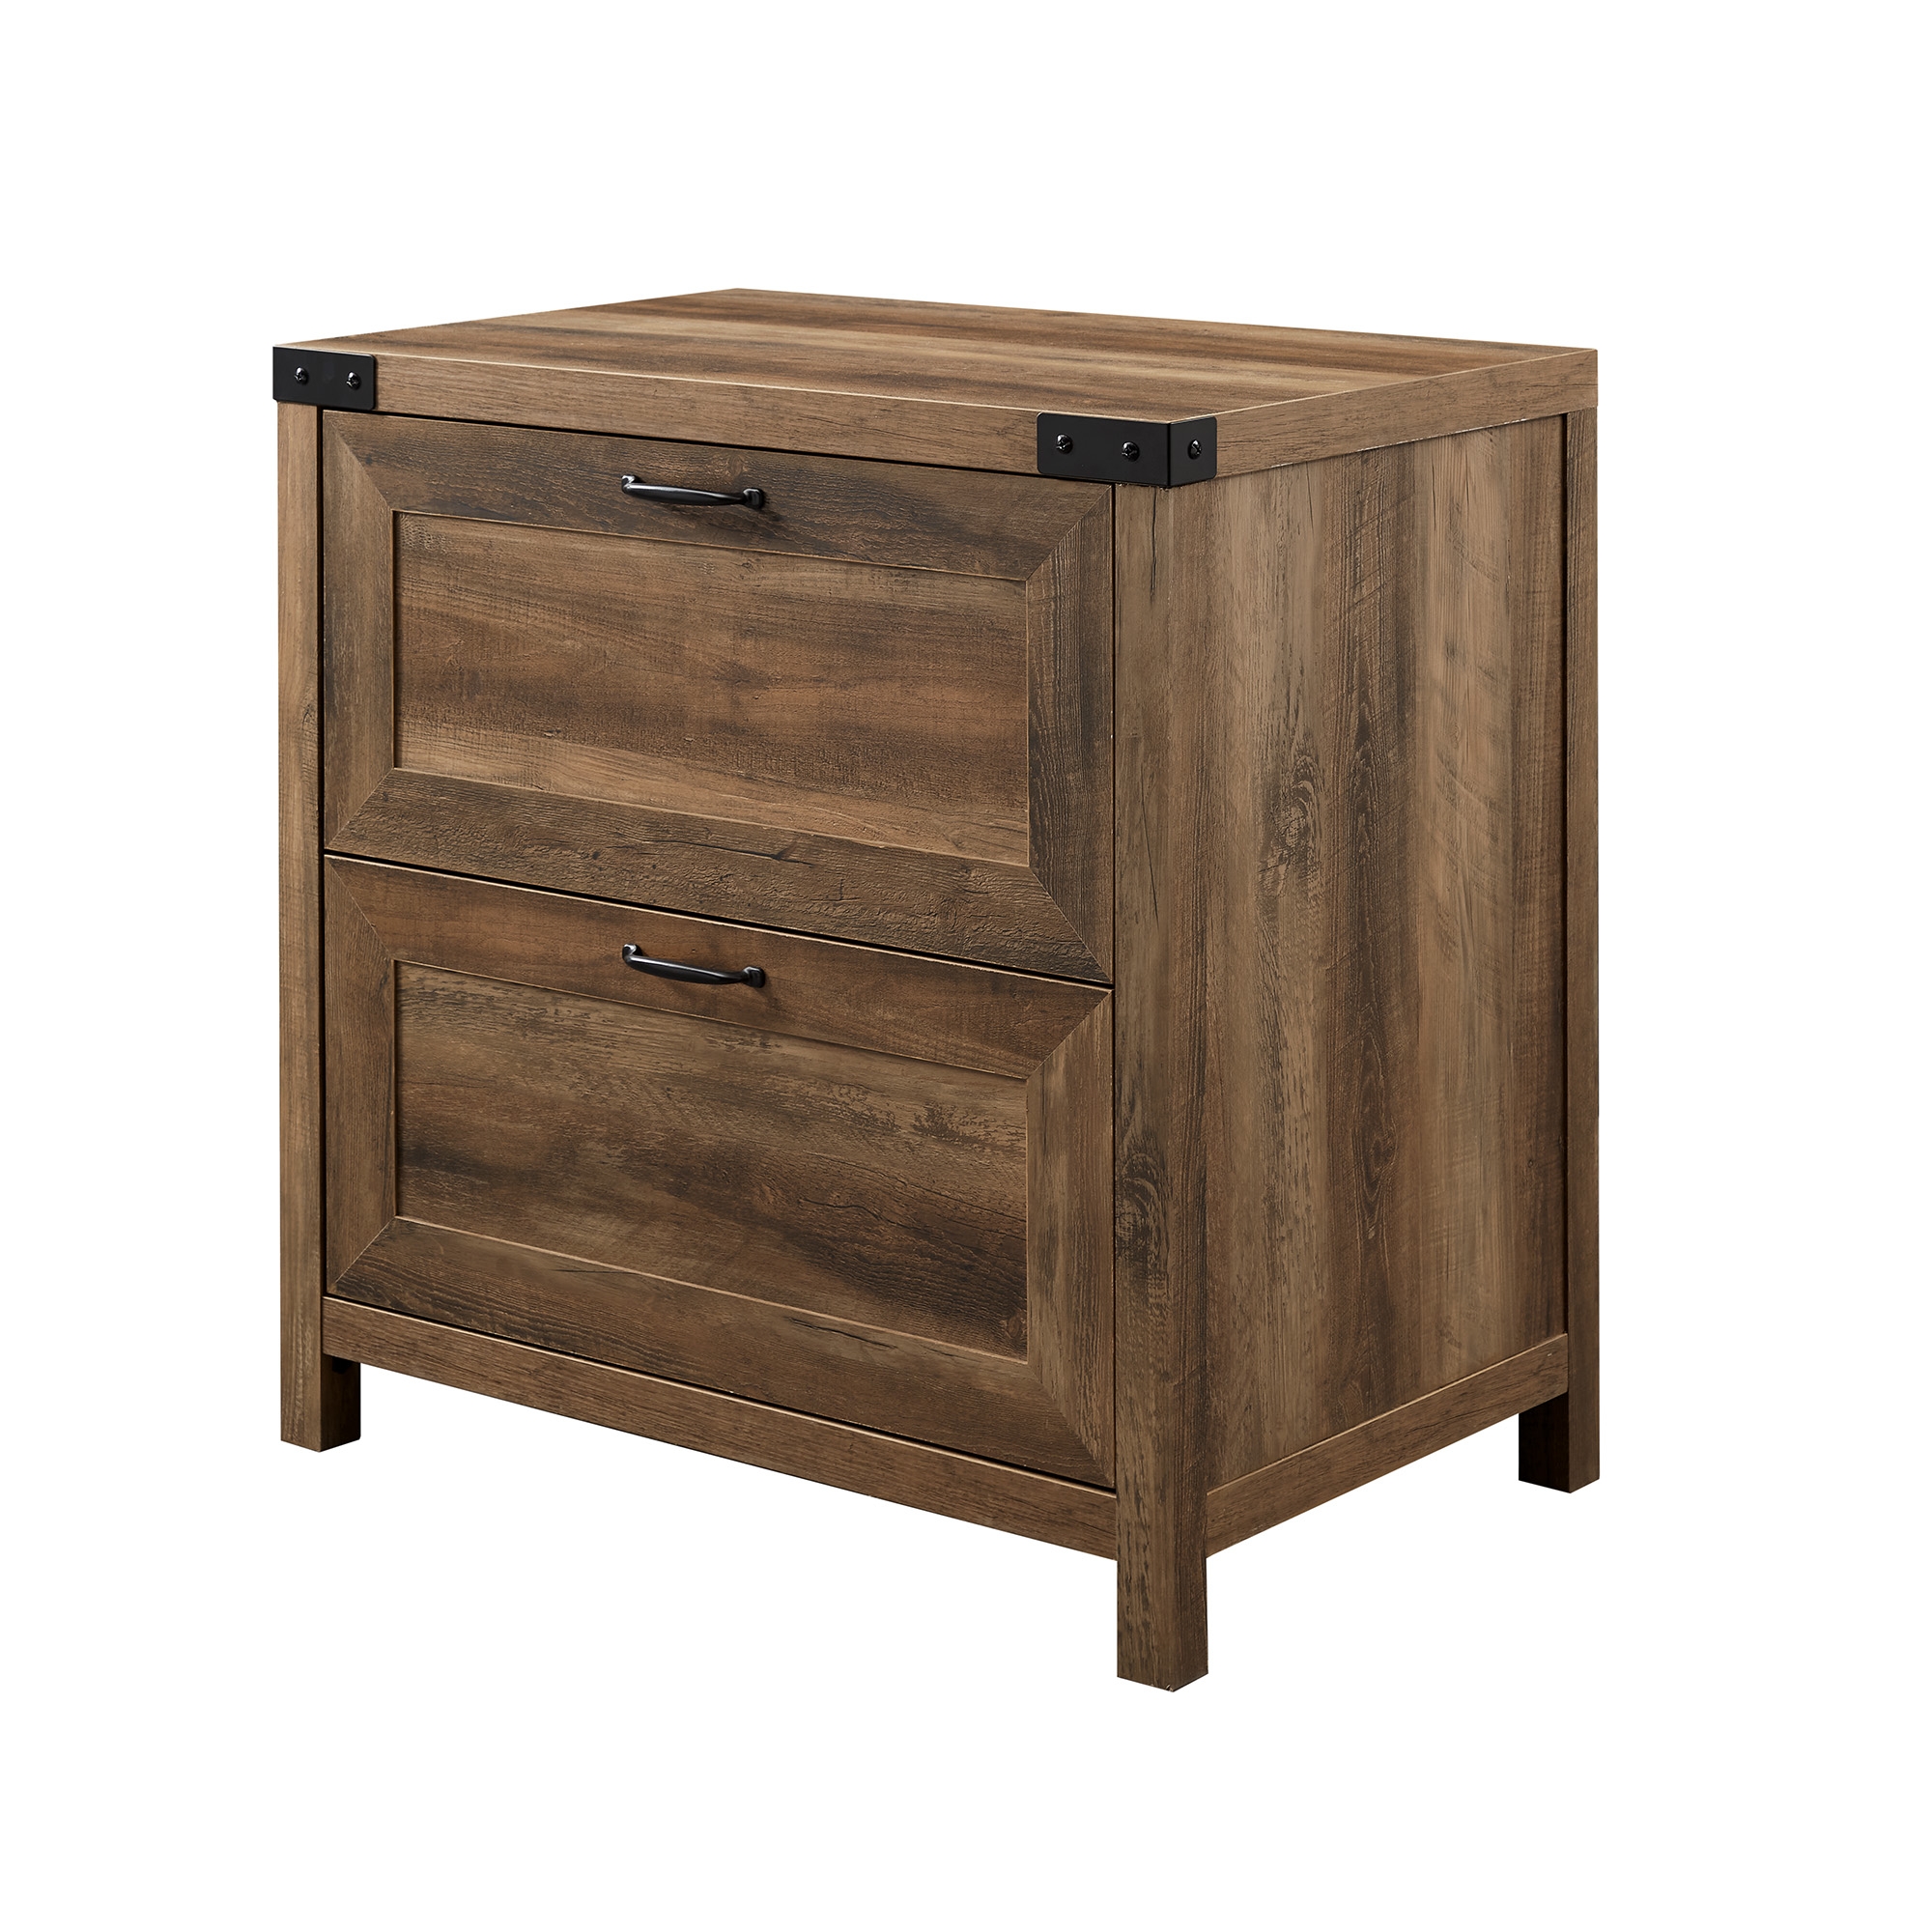 Modern Farmhouse 2-Drawer Filing Cabinet with Metal Accents – Rustic Oak - Image 2